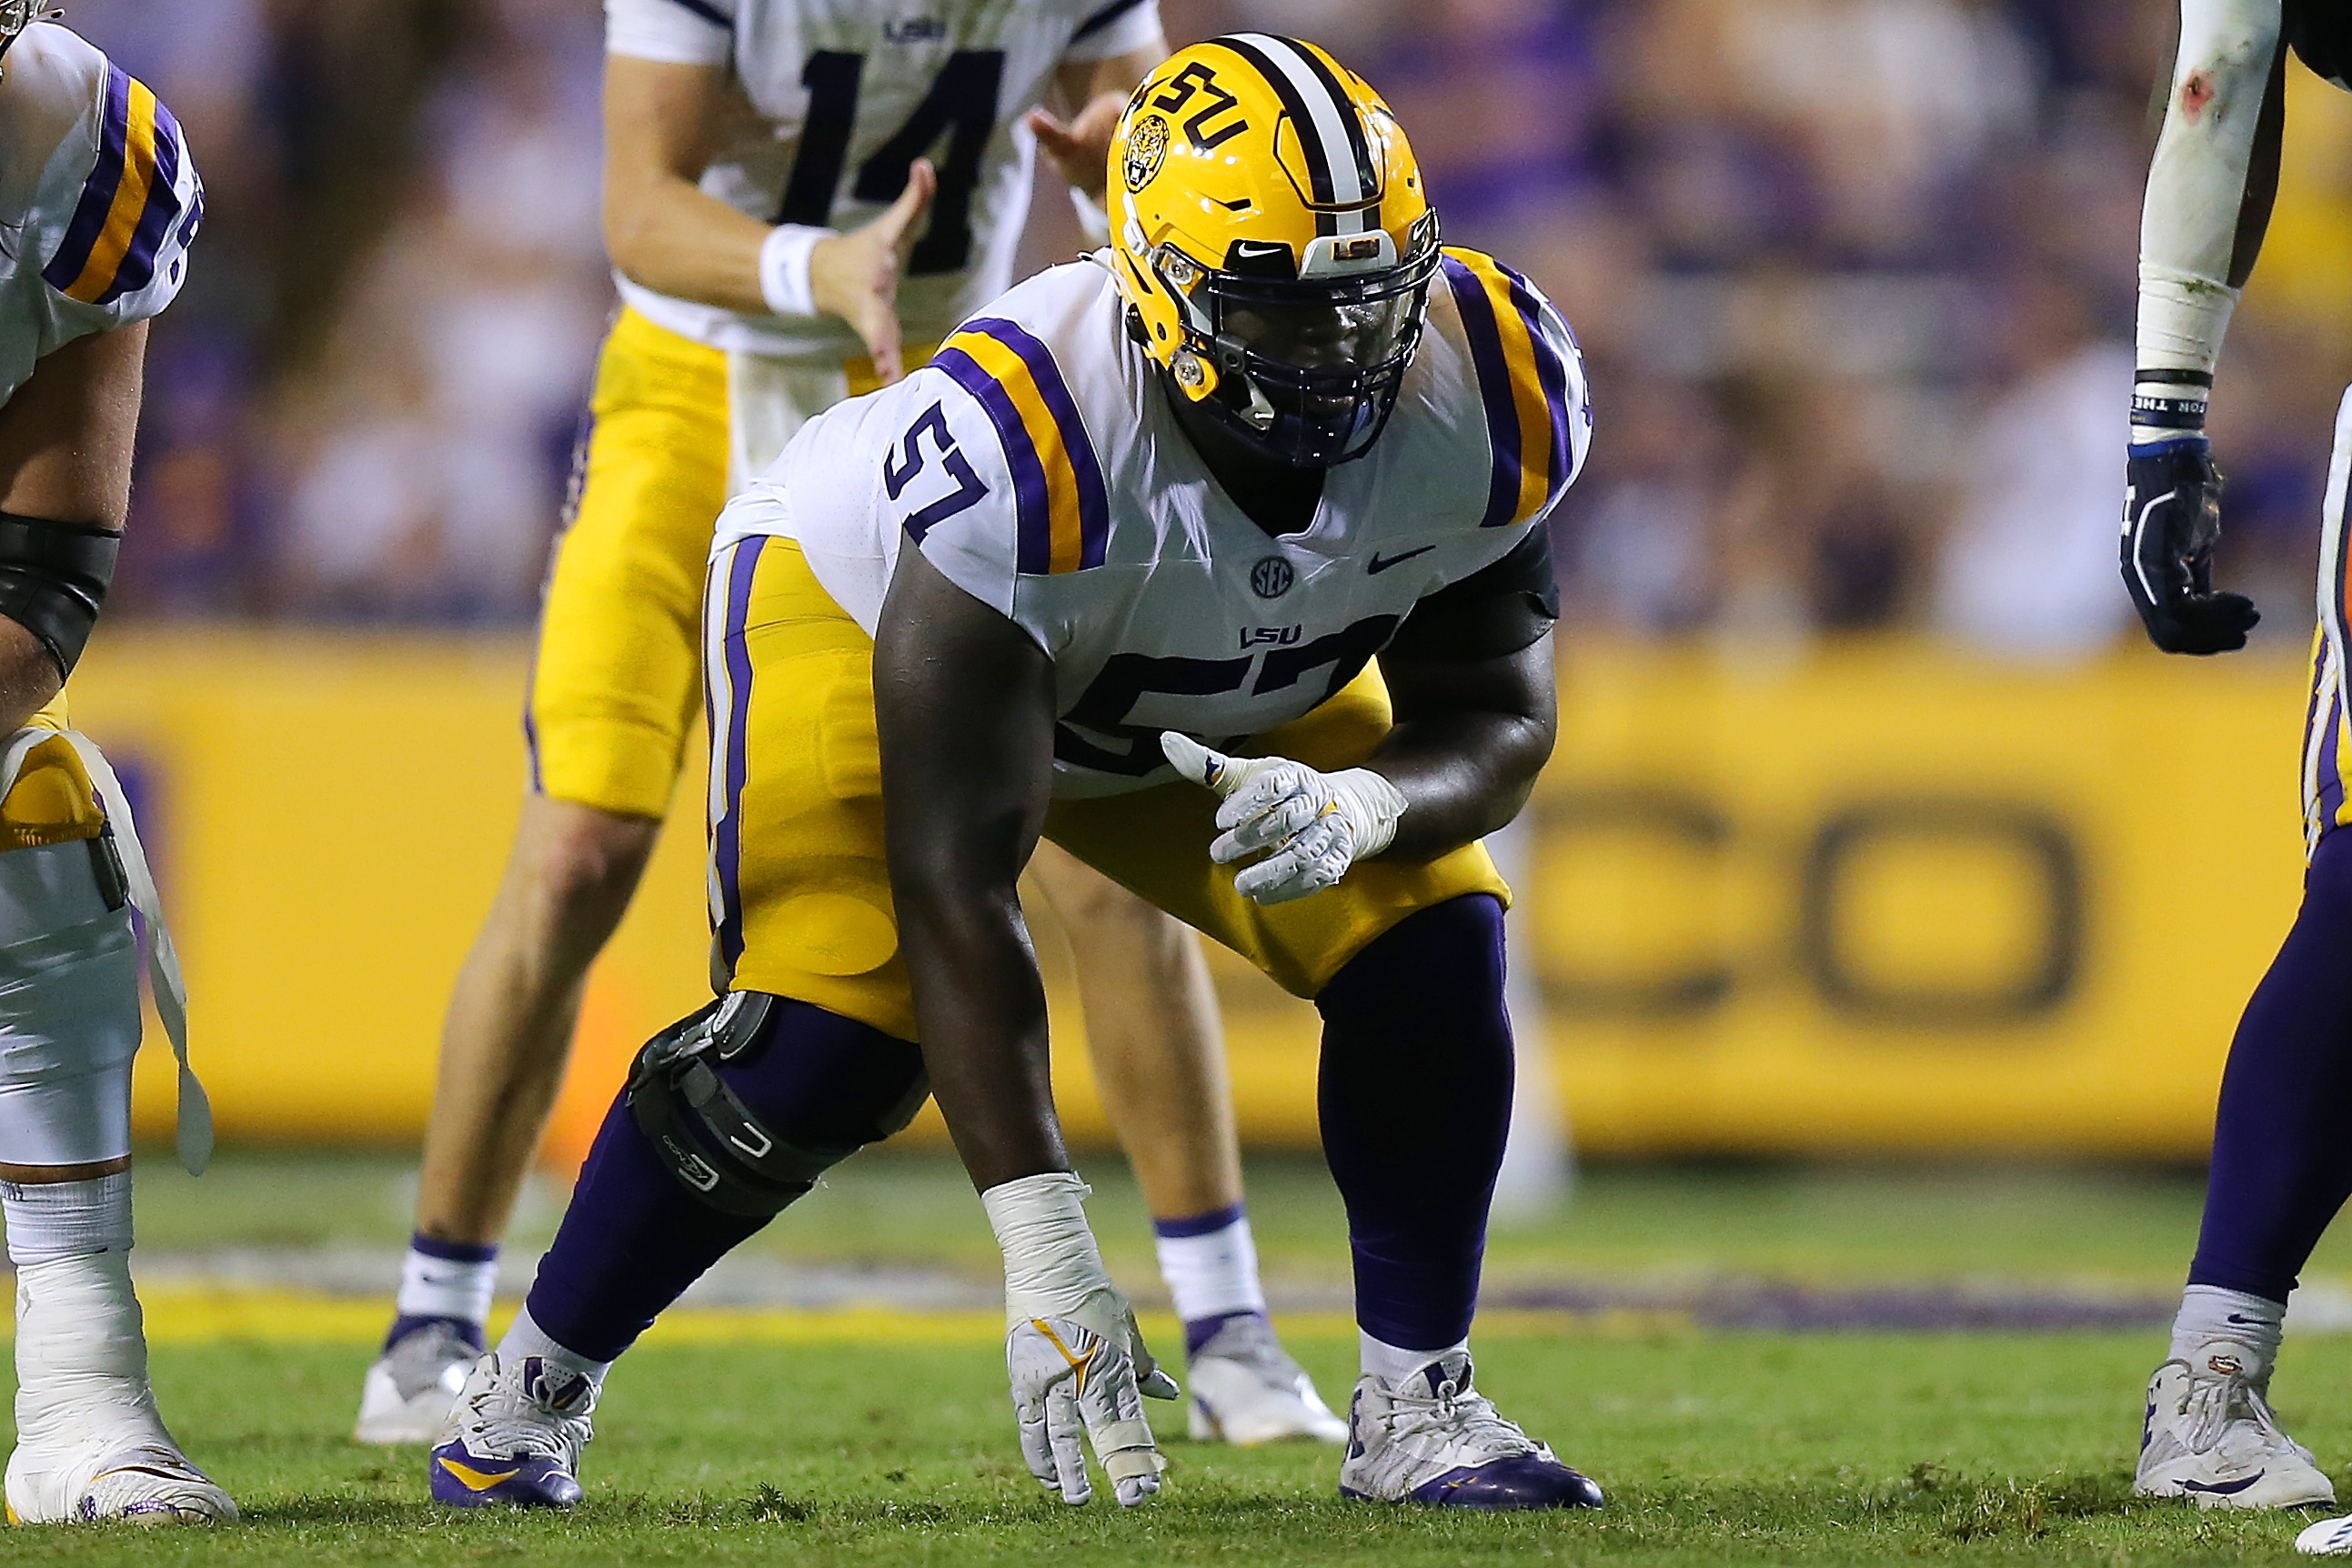 Chasen Hines NFL Draft 2022: Scouting Report for New England